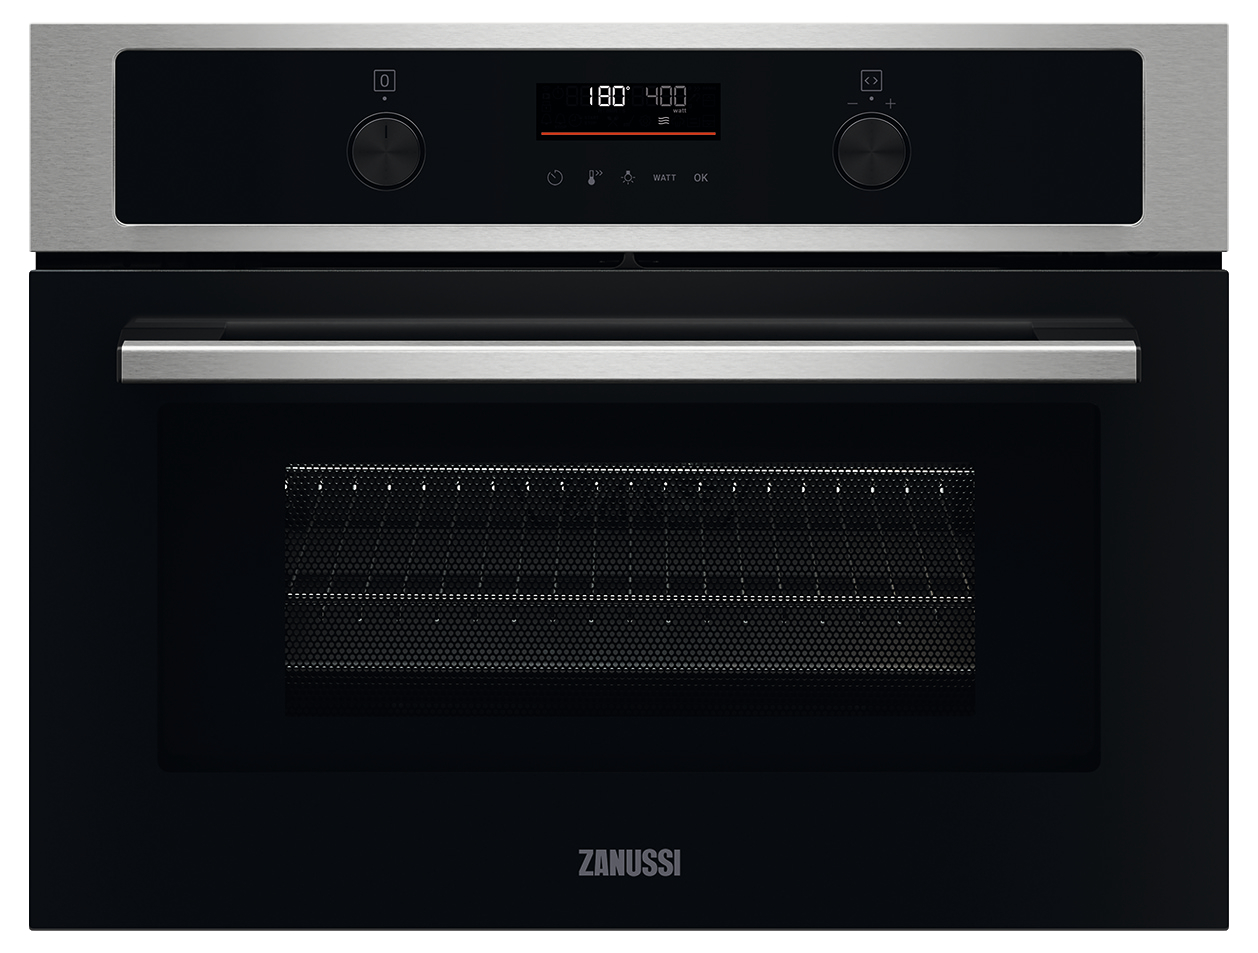 Zanussi ZVENM7XN Combination Compact Oven with Microwave - Stainless Steel